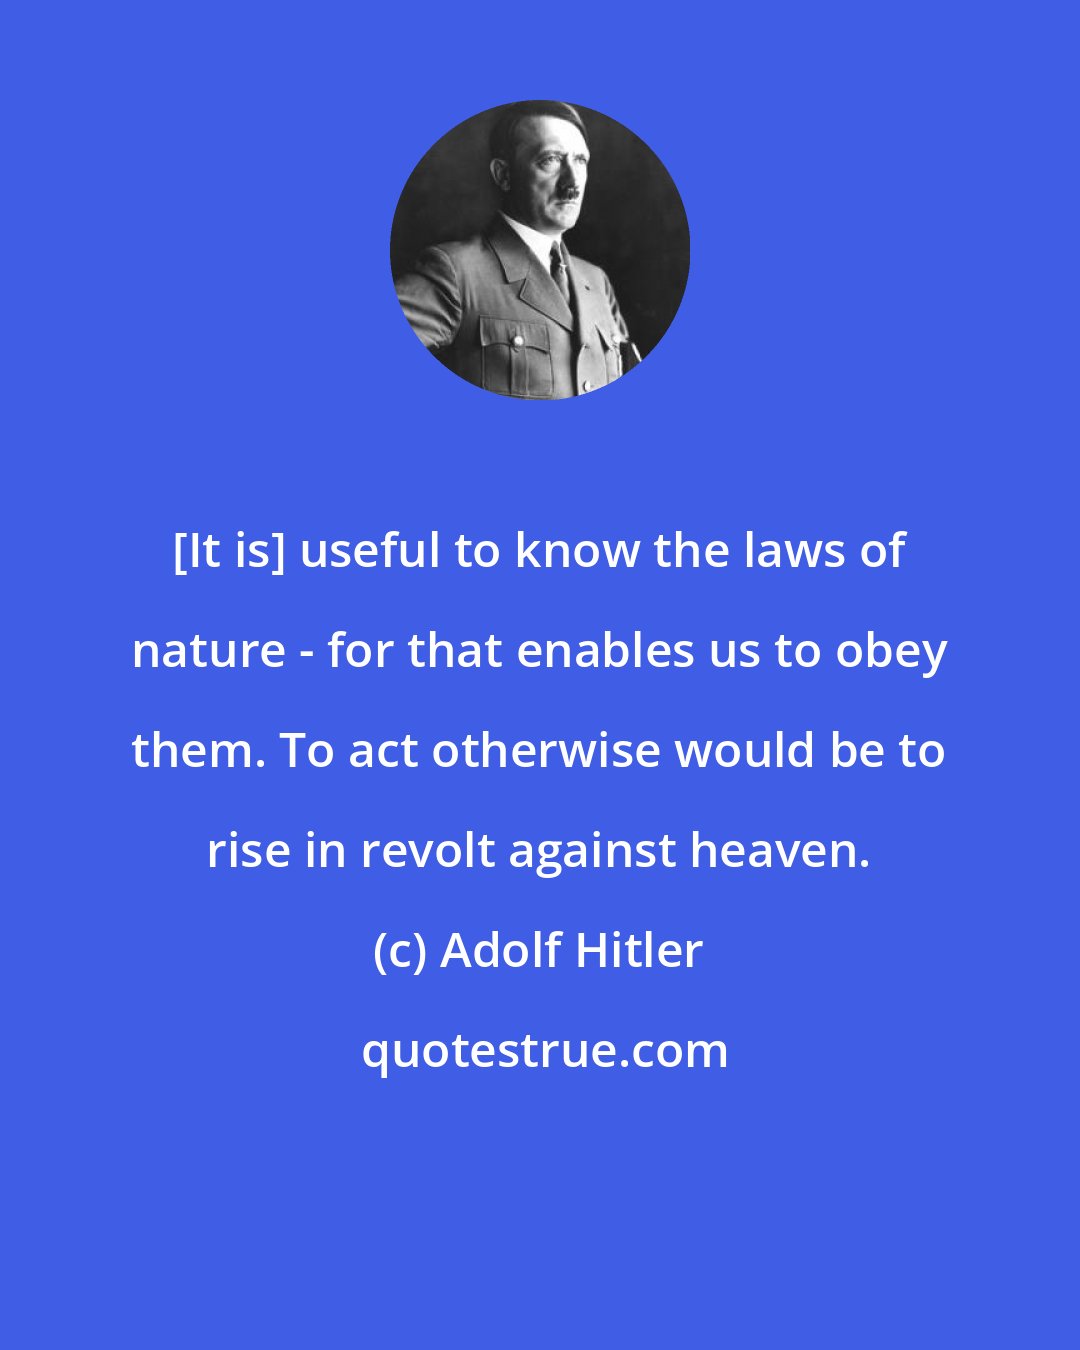 Adolf Hitler: [It is] useful to know the laws of nature - for that enables us to obey them. To act otherwise would be to rise in revolt against heaven.